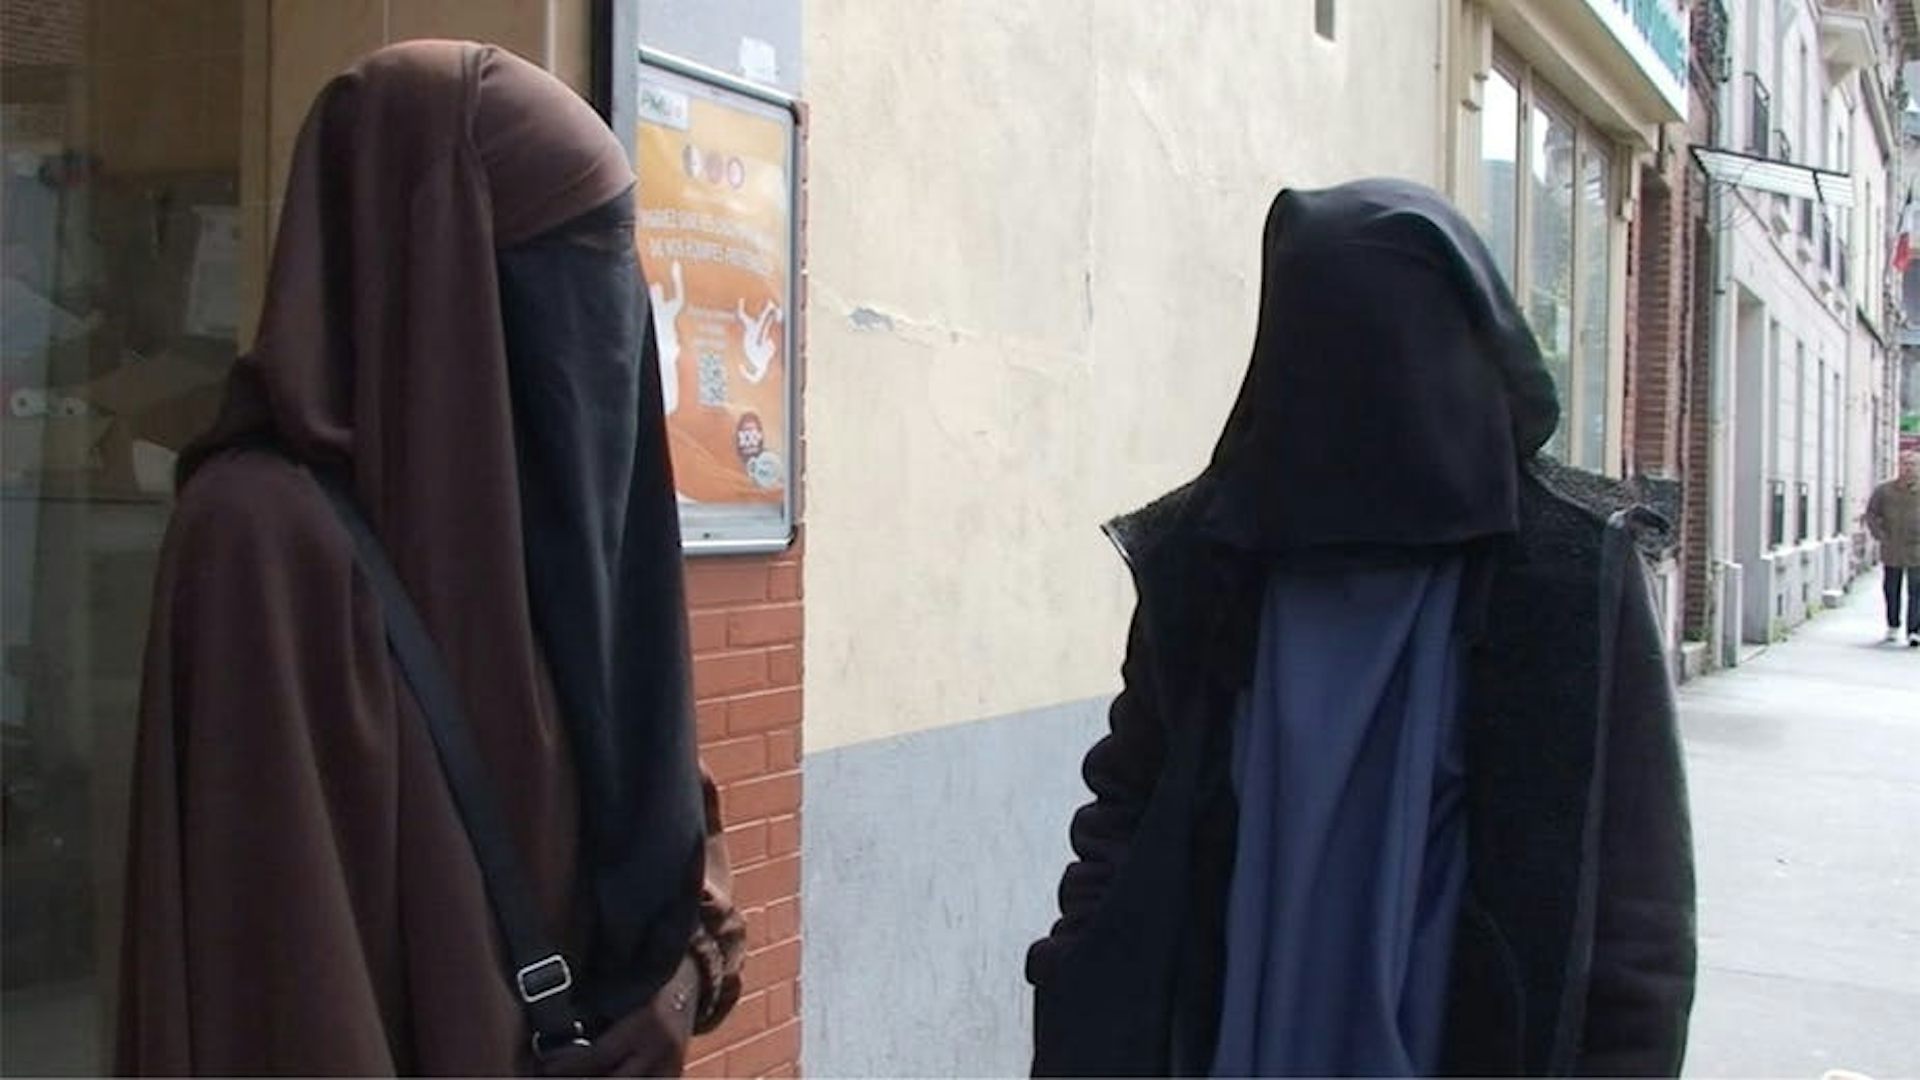 After the niqab what life is like for